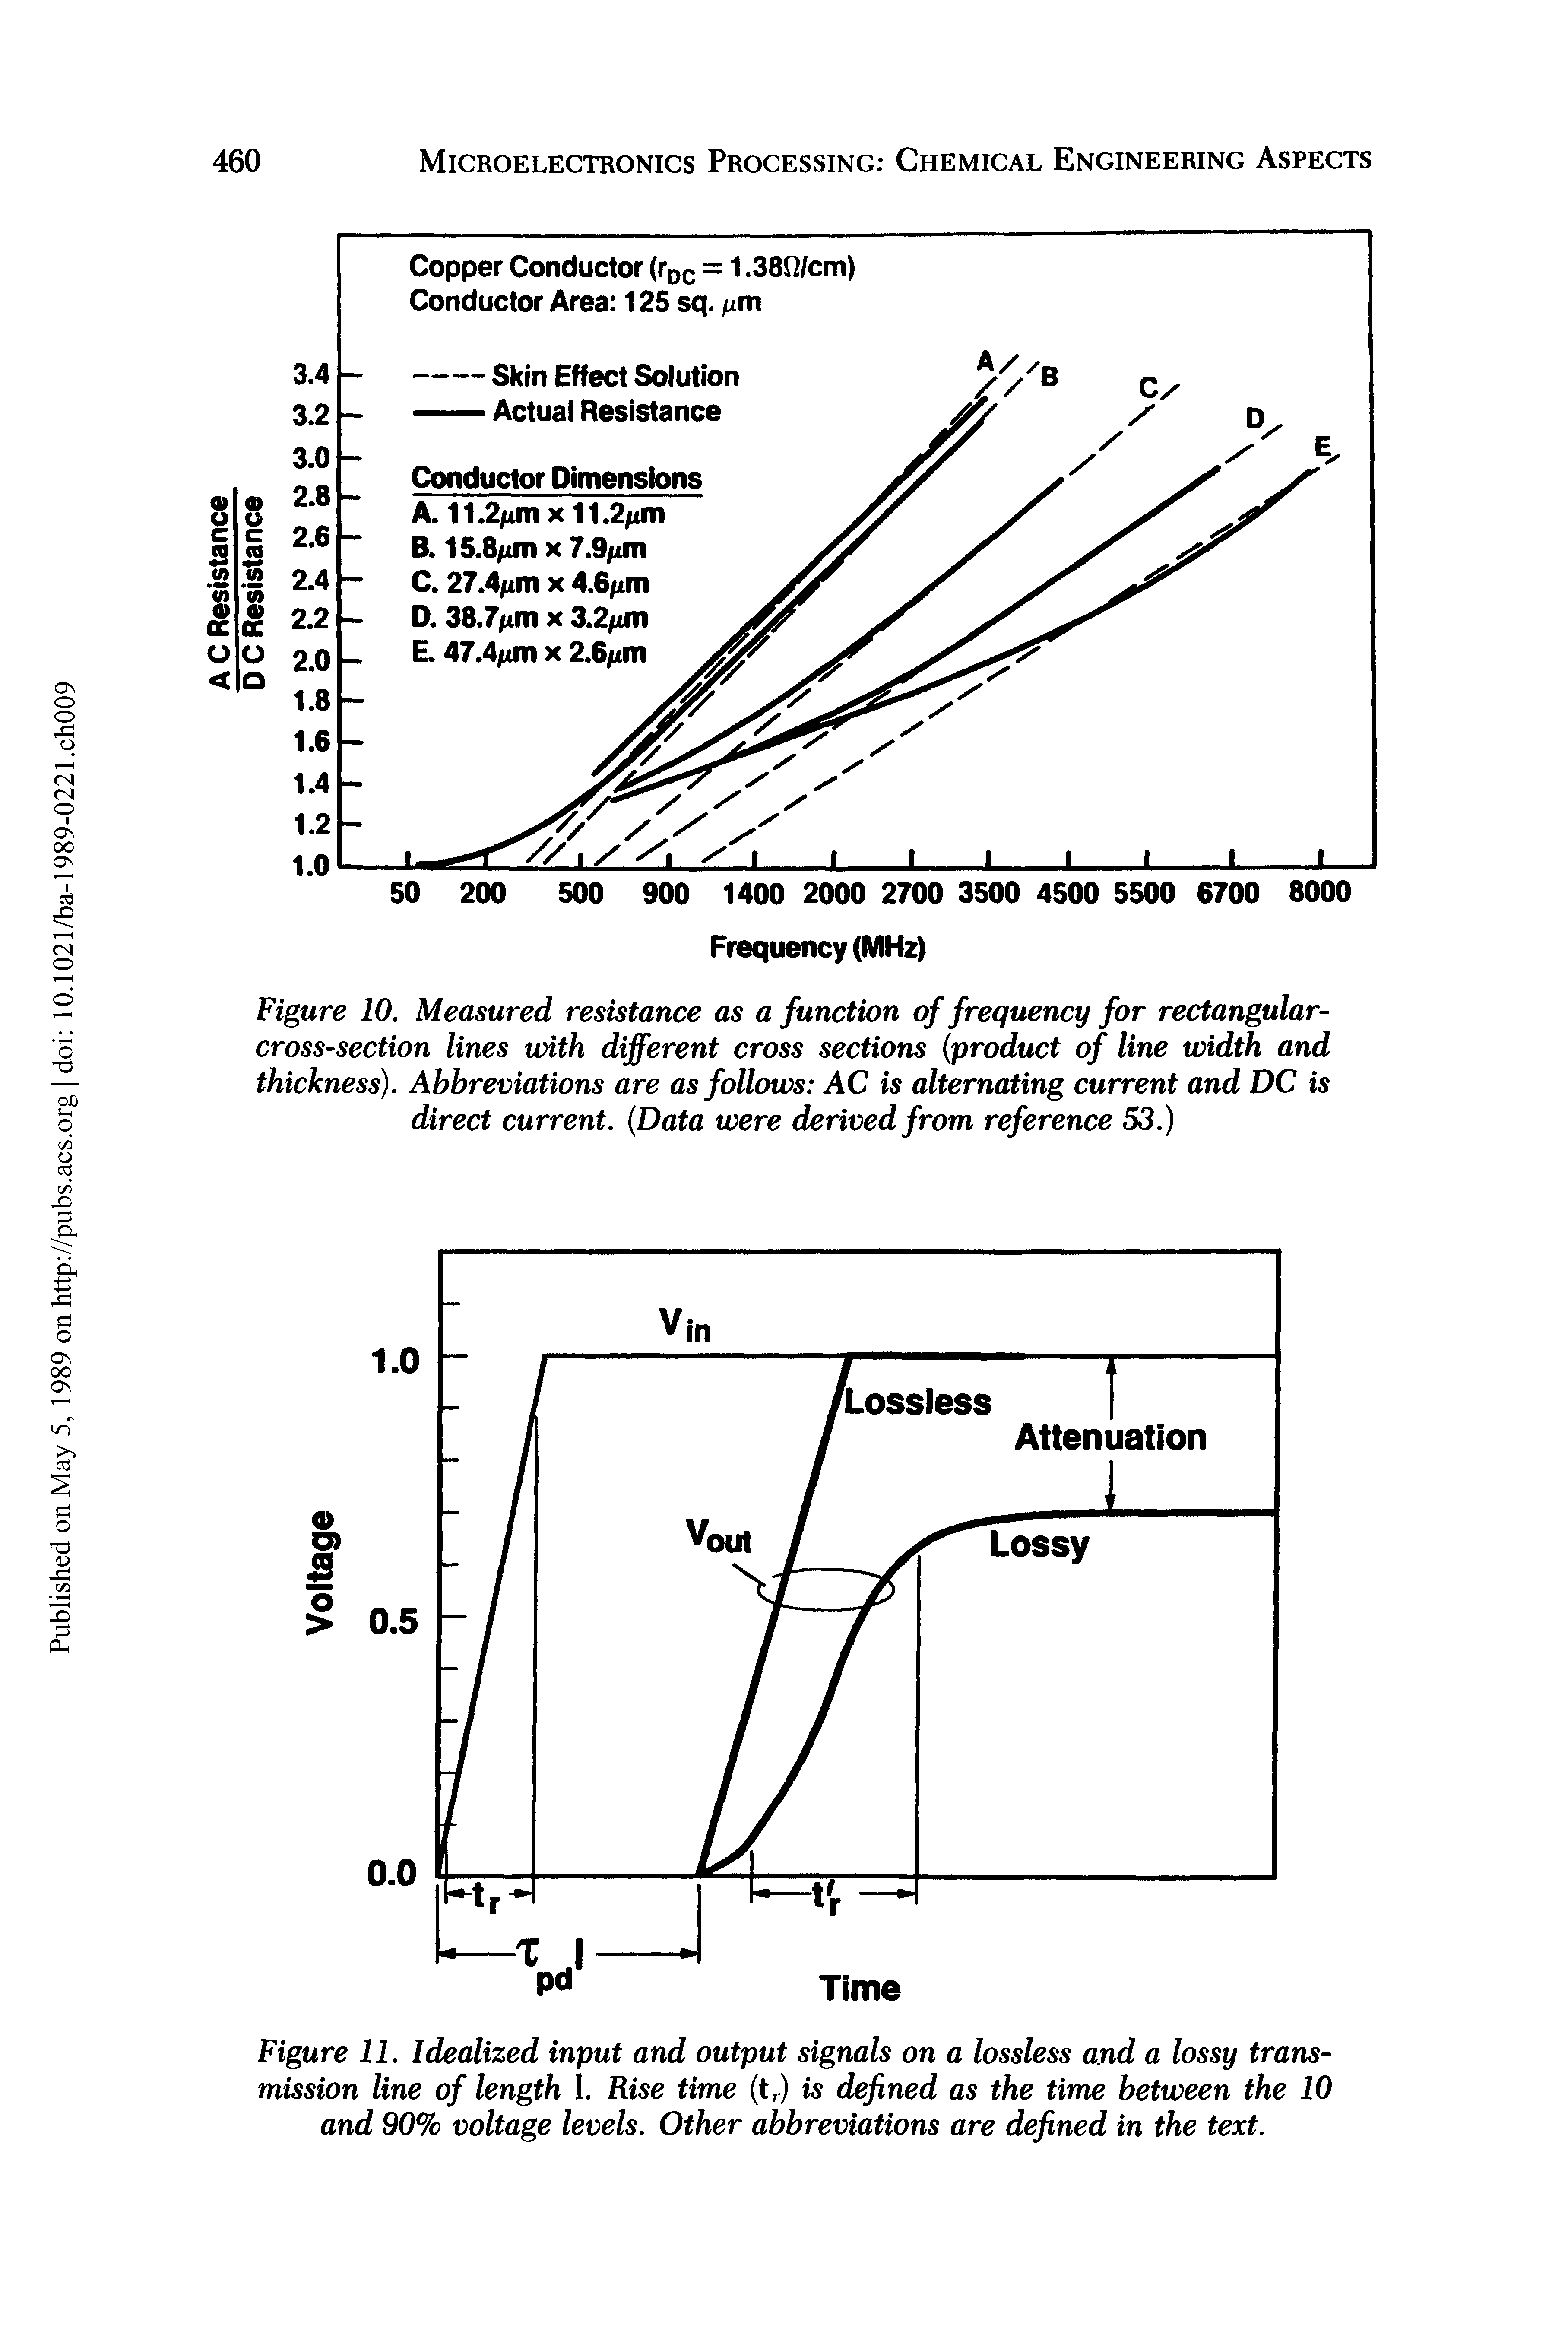 Figure 10. Measured resistance as a function of frequency for rectangular-cross-section lines with different cross sections (product of line width and thickness). Abbreviations are as follows AC is alternating current and DC is direct current. (Data were derived from reference 53.)...